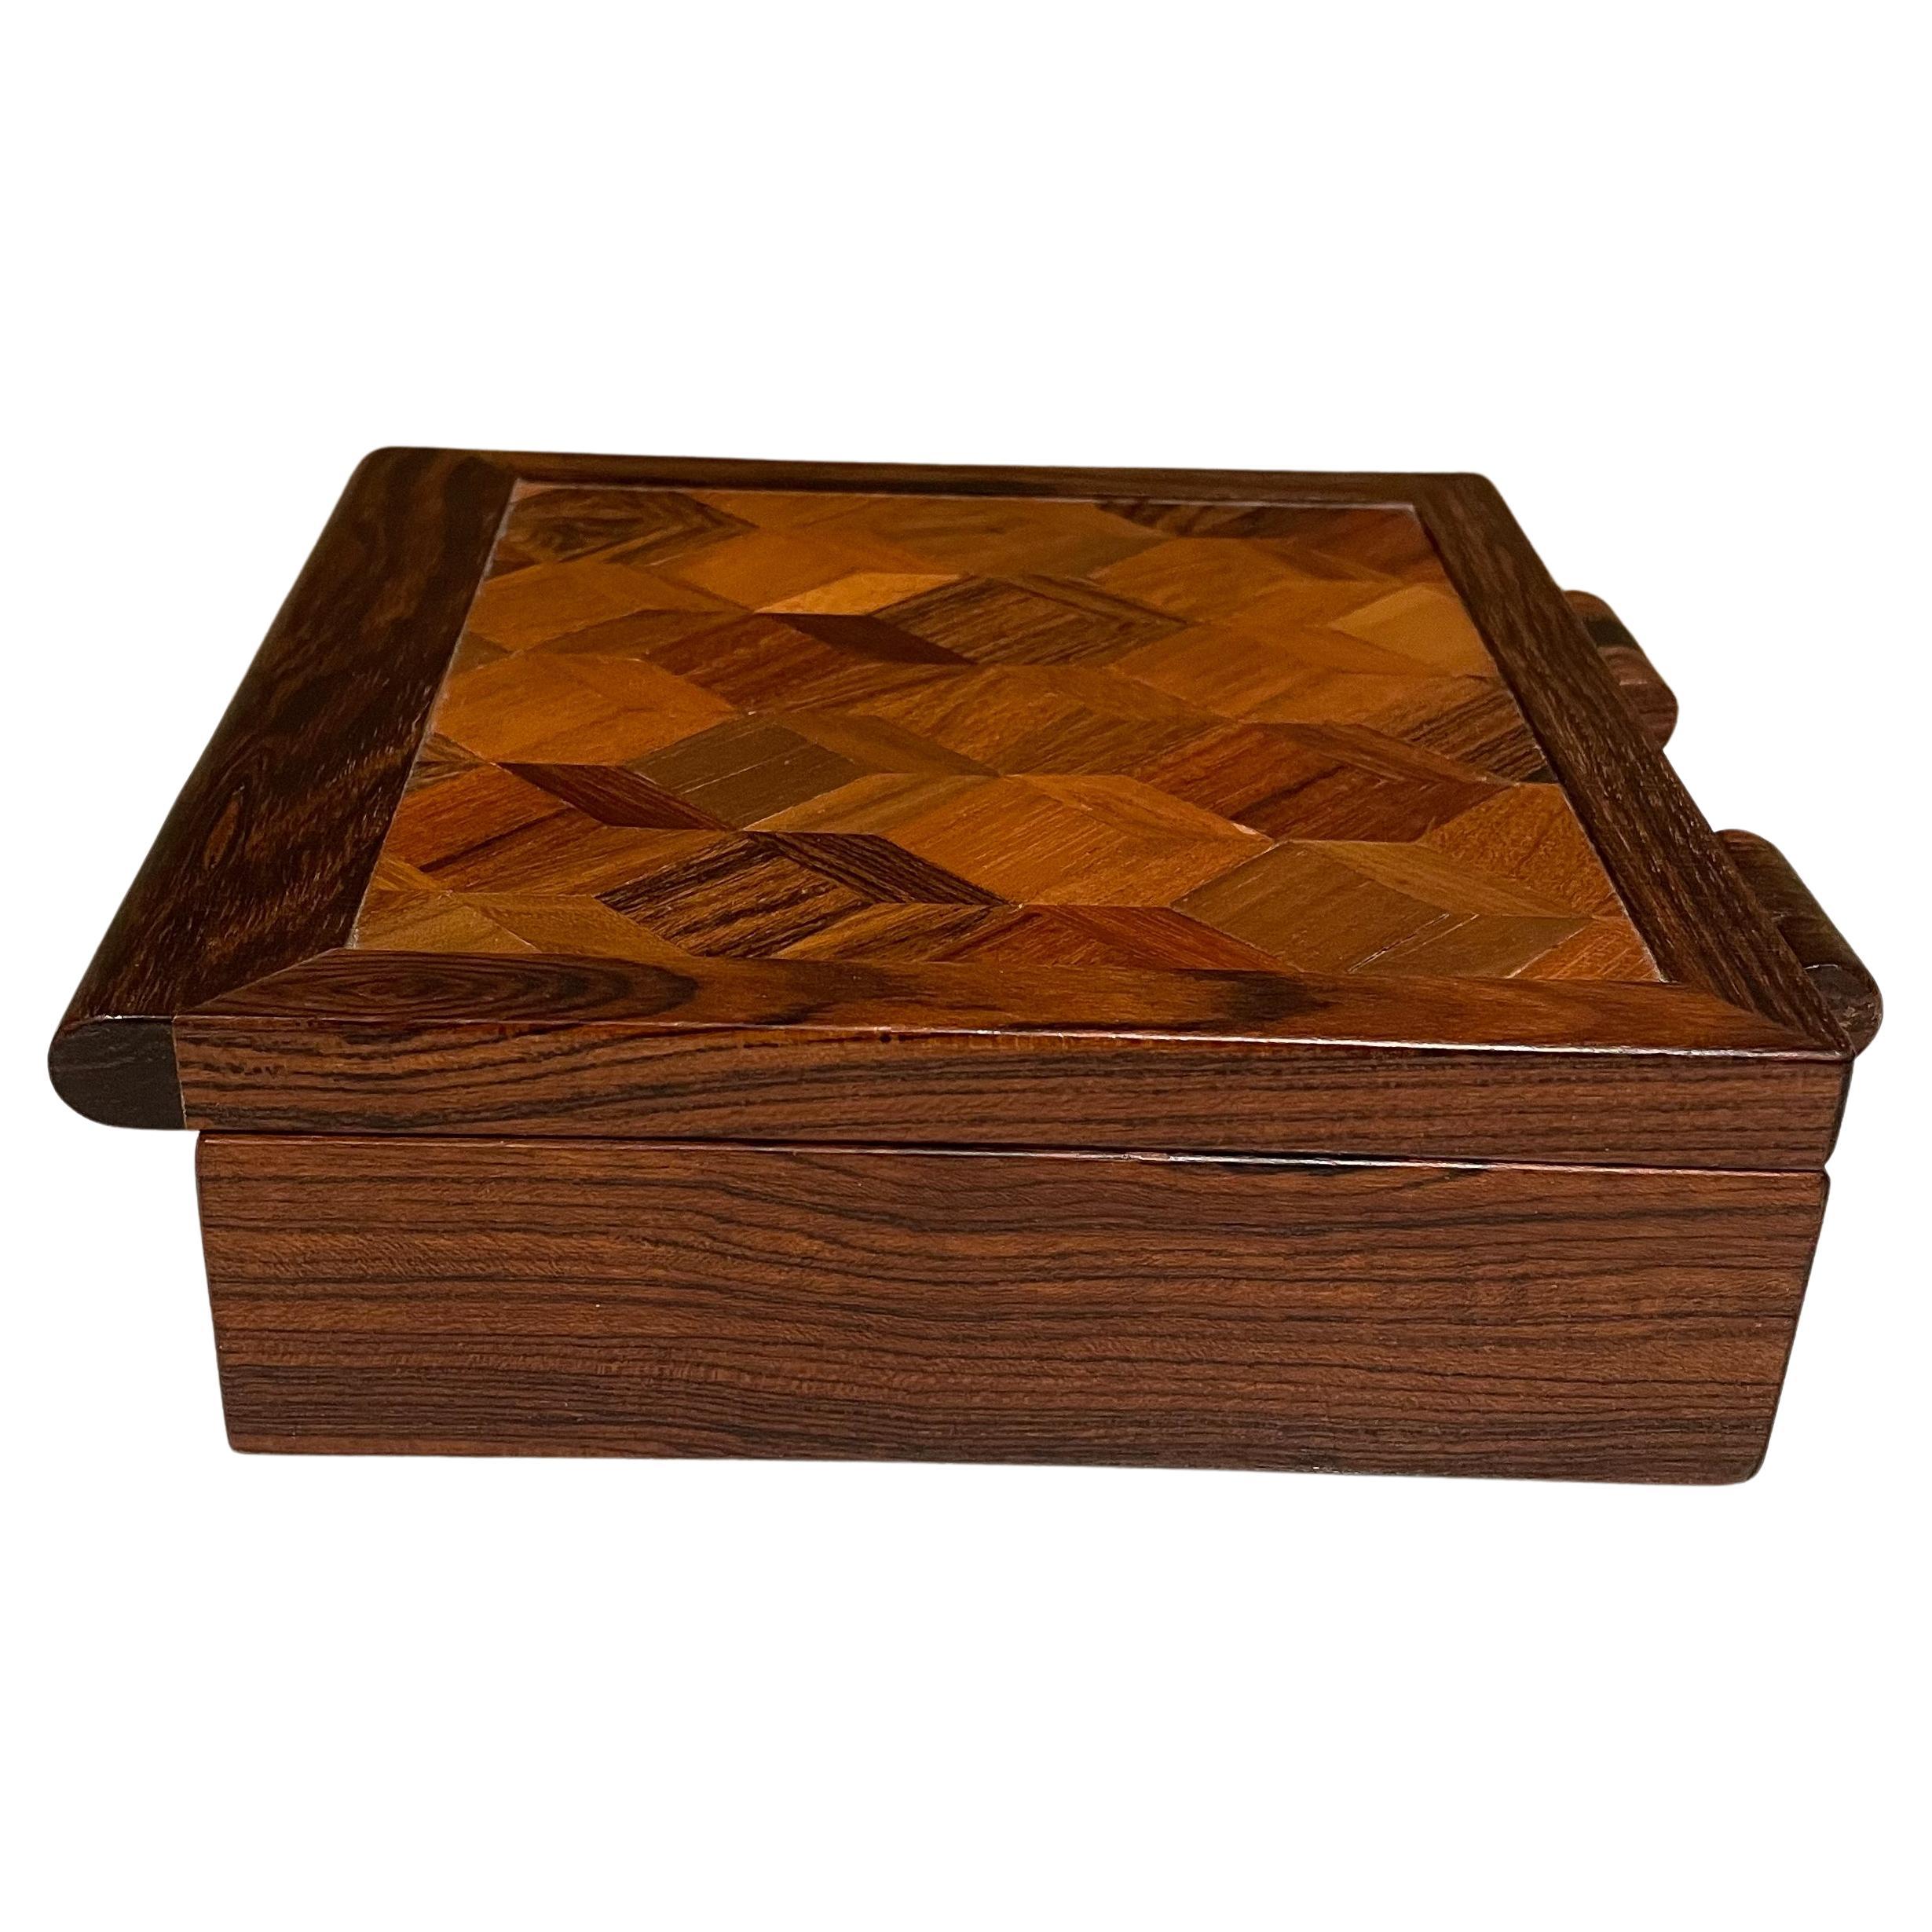 Wood Hinged Box
Cocobolo and Exotic Mosaic Patchwork Small Wood Box by Don Shoemaker for Senal Morelia Mexico
Refined wood hinges
Measures: 7.5 D x 5.75 x 2 H, inside 4.75 x 4.75 x 1.13 H
Original preowned vintage condition.
Refer to images